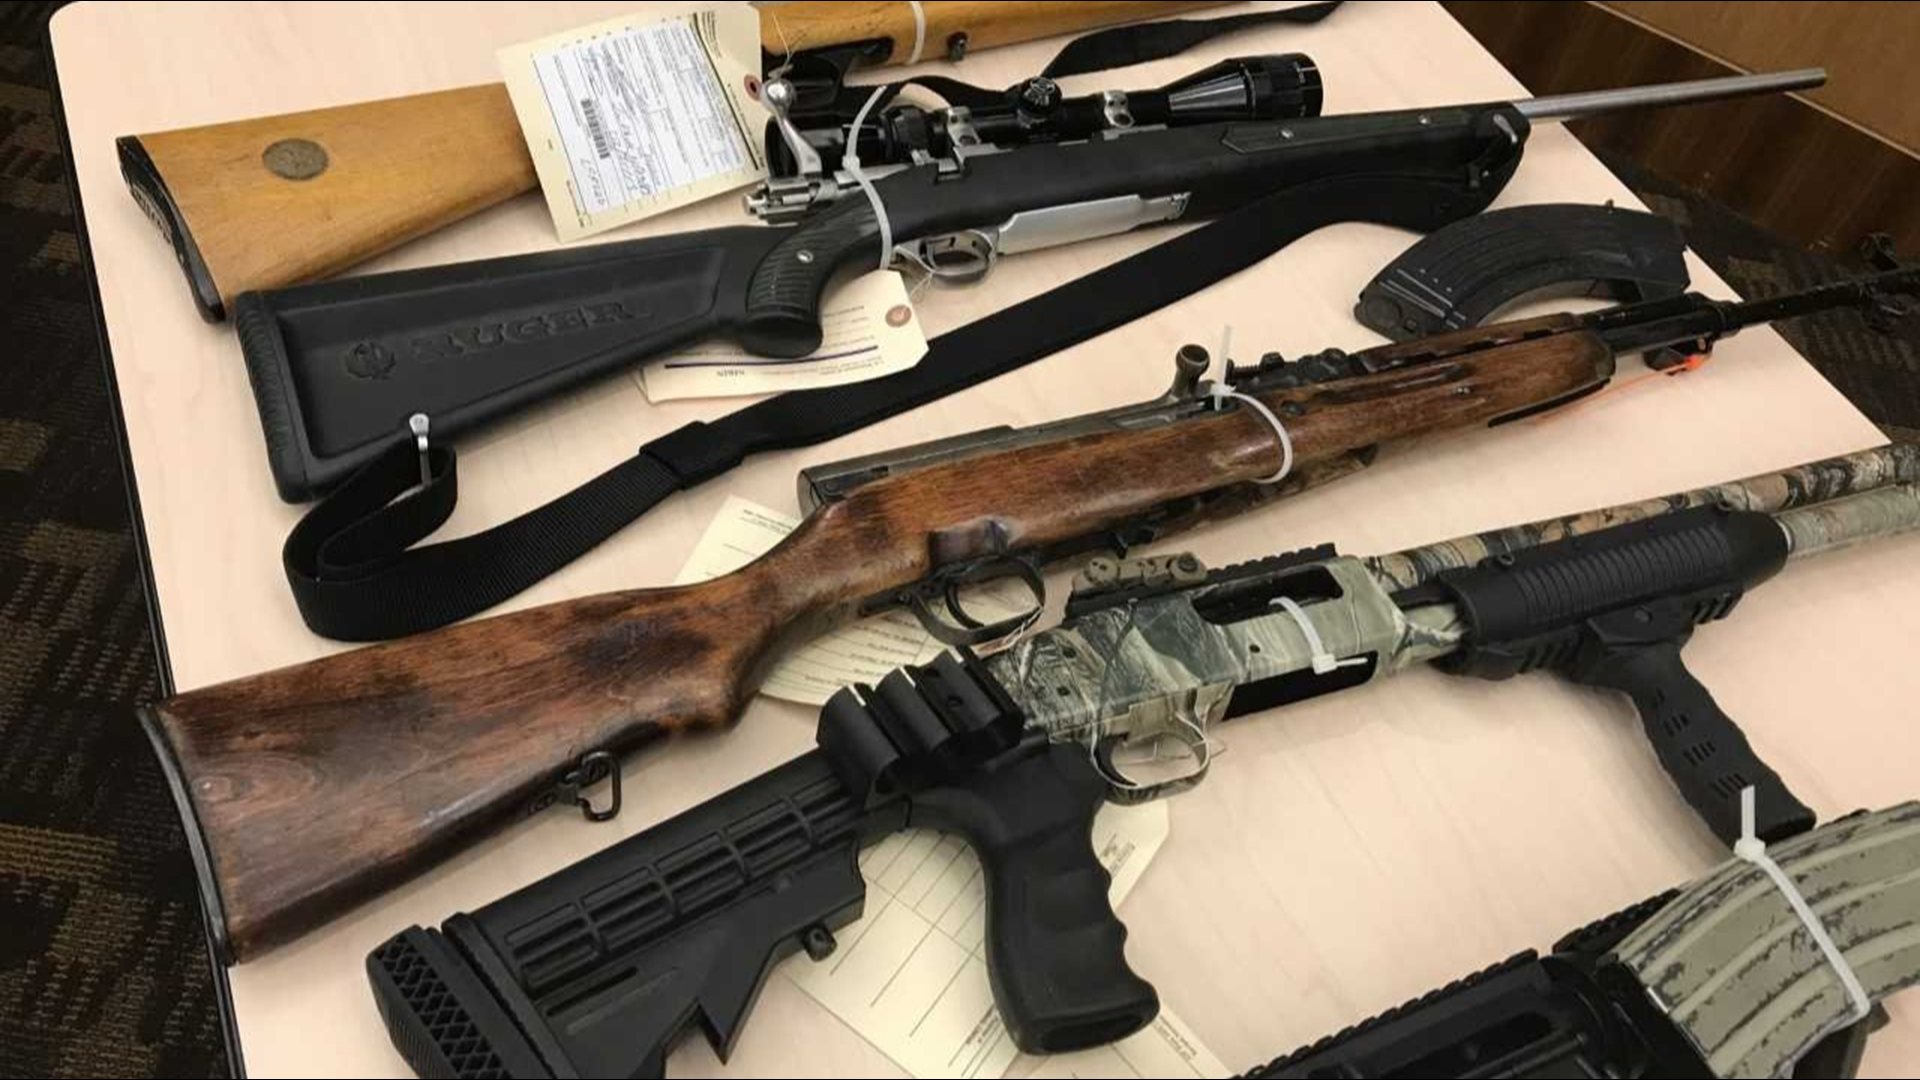 For three days in a row, illegal guns have been confiscated and arrests have been made in Stockton. The proactive approach comes following a deadly weekend in the city.